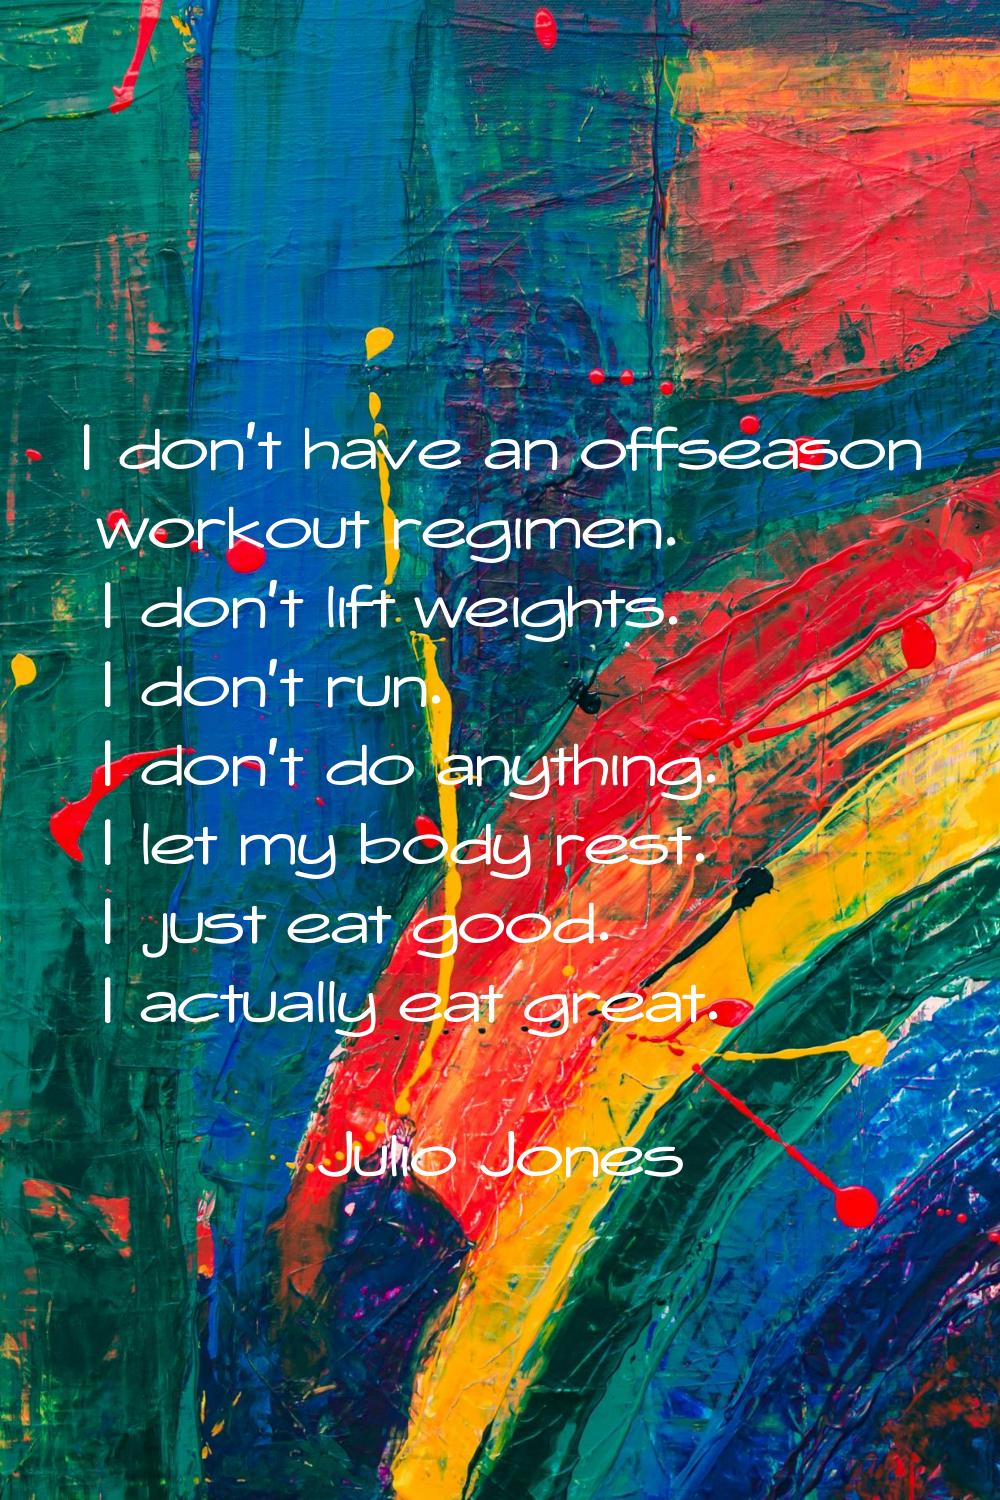 I don't have an offseason workout regimen. I don't lift weights. I don't run. I don't do anything. 